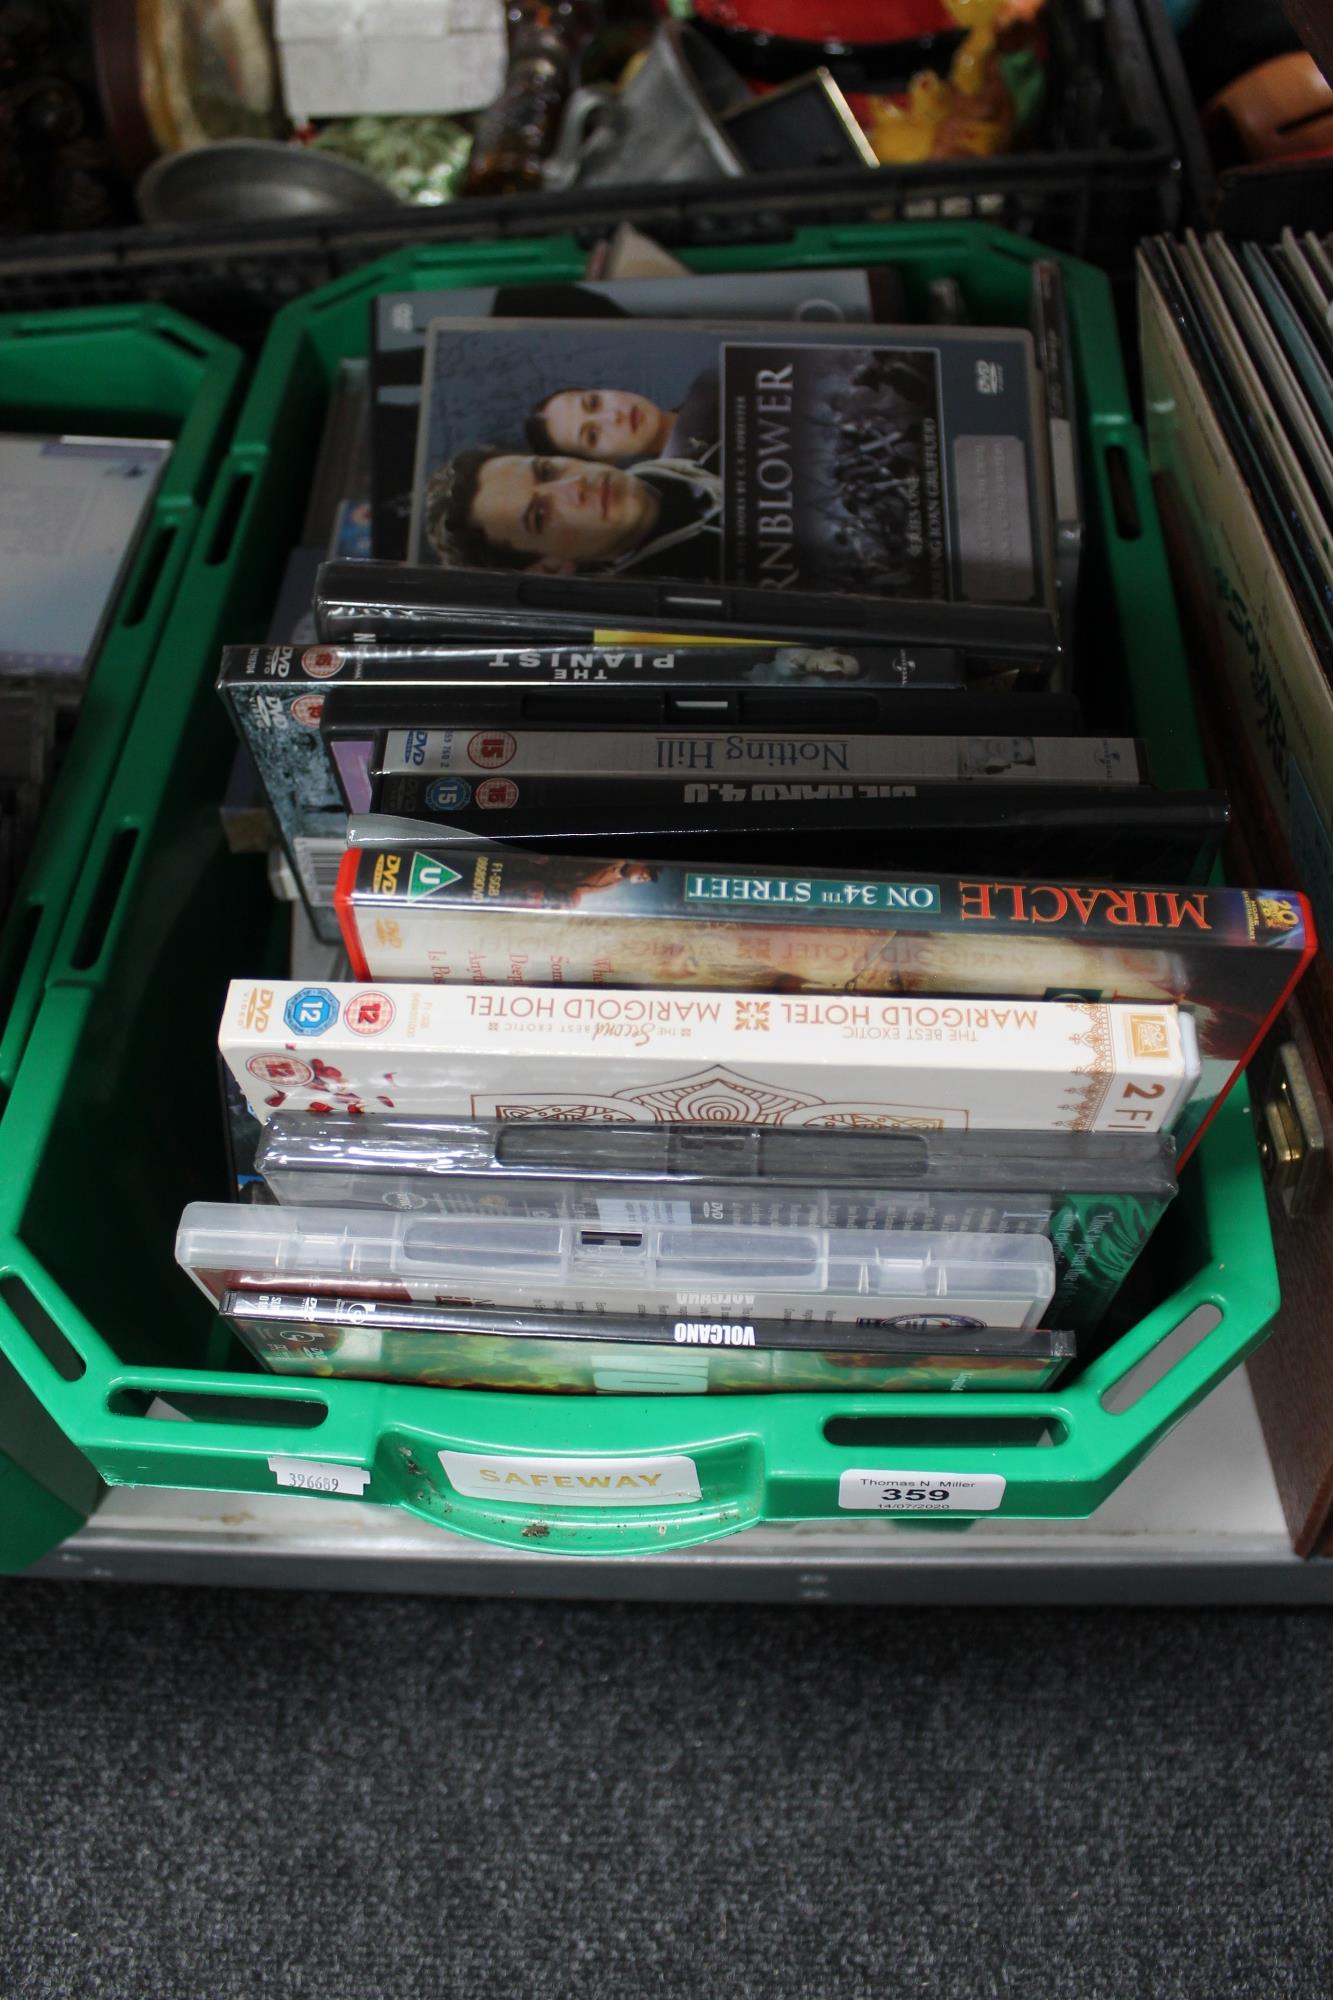 A large crate of DVD's